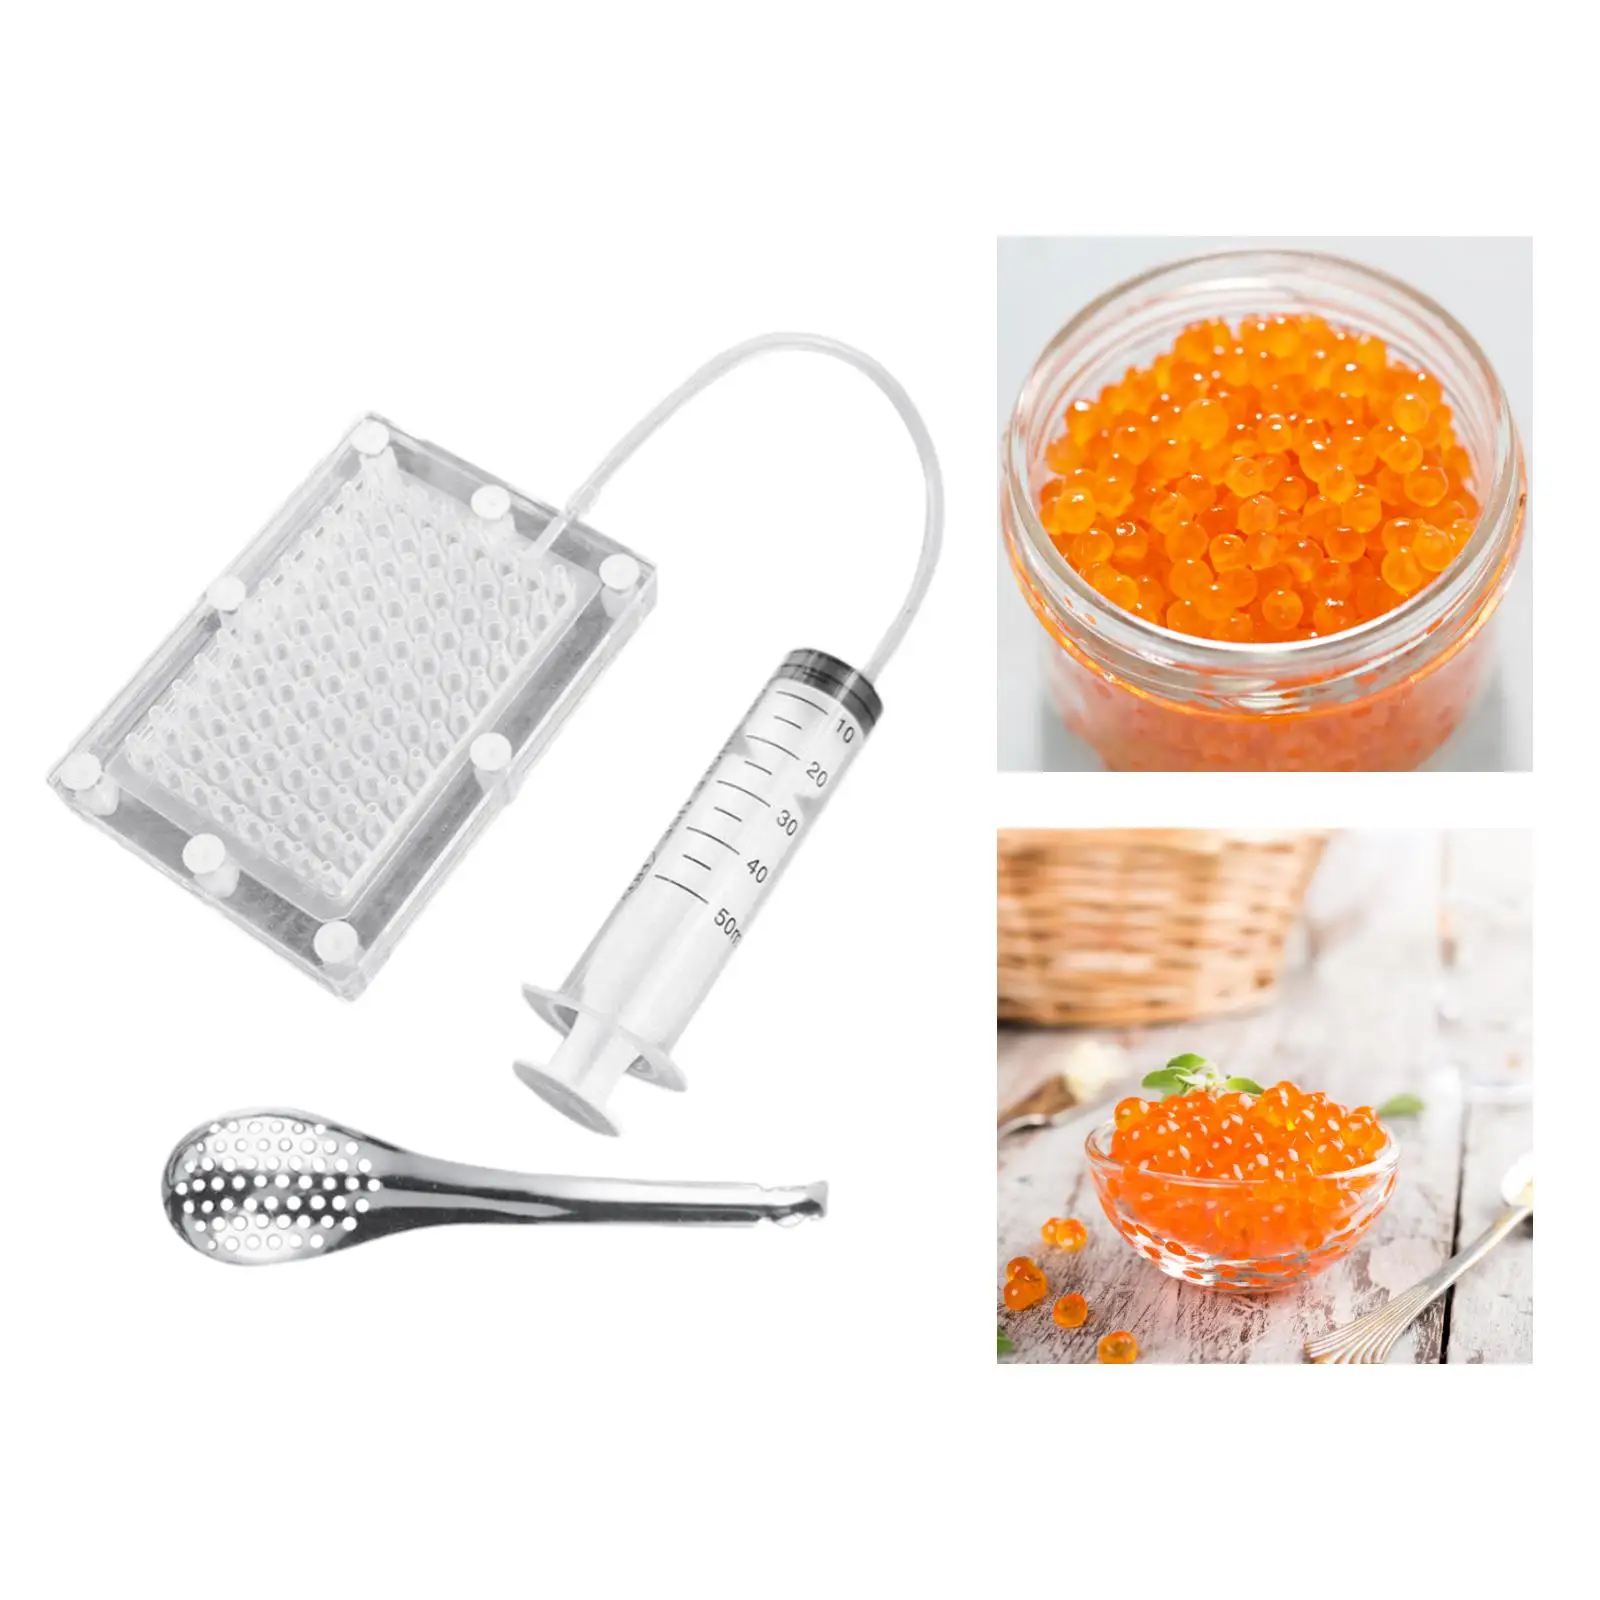  Gastronomy  Maker Gourmet with Tube & Spoon Cuisine Gadgets